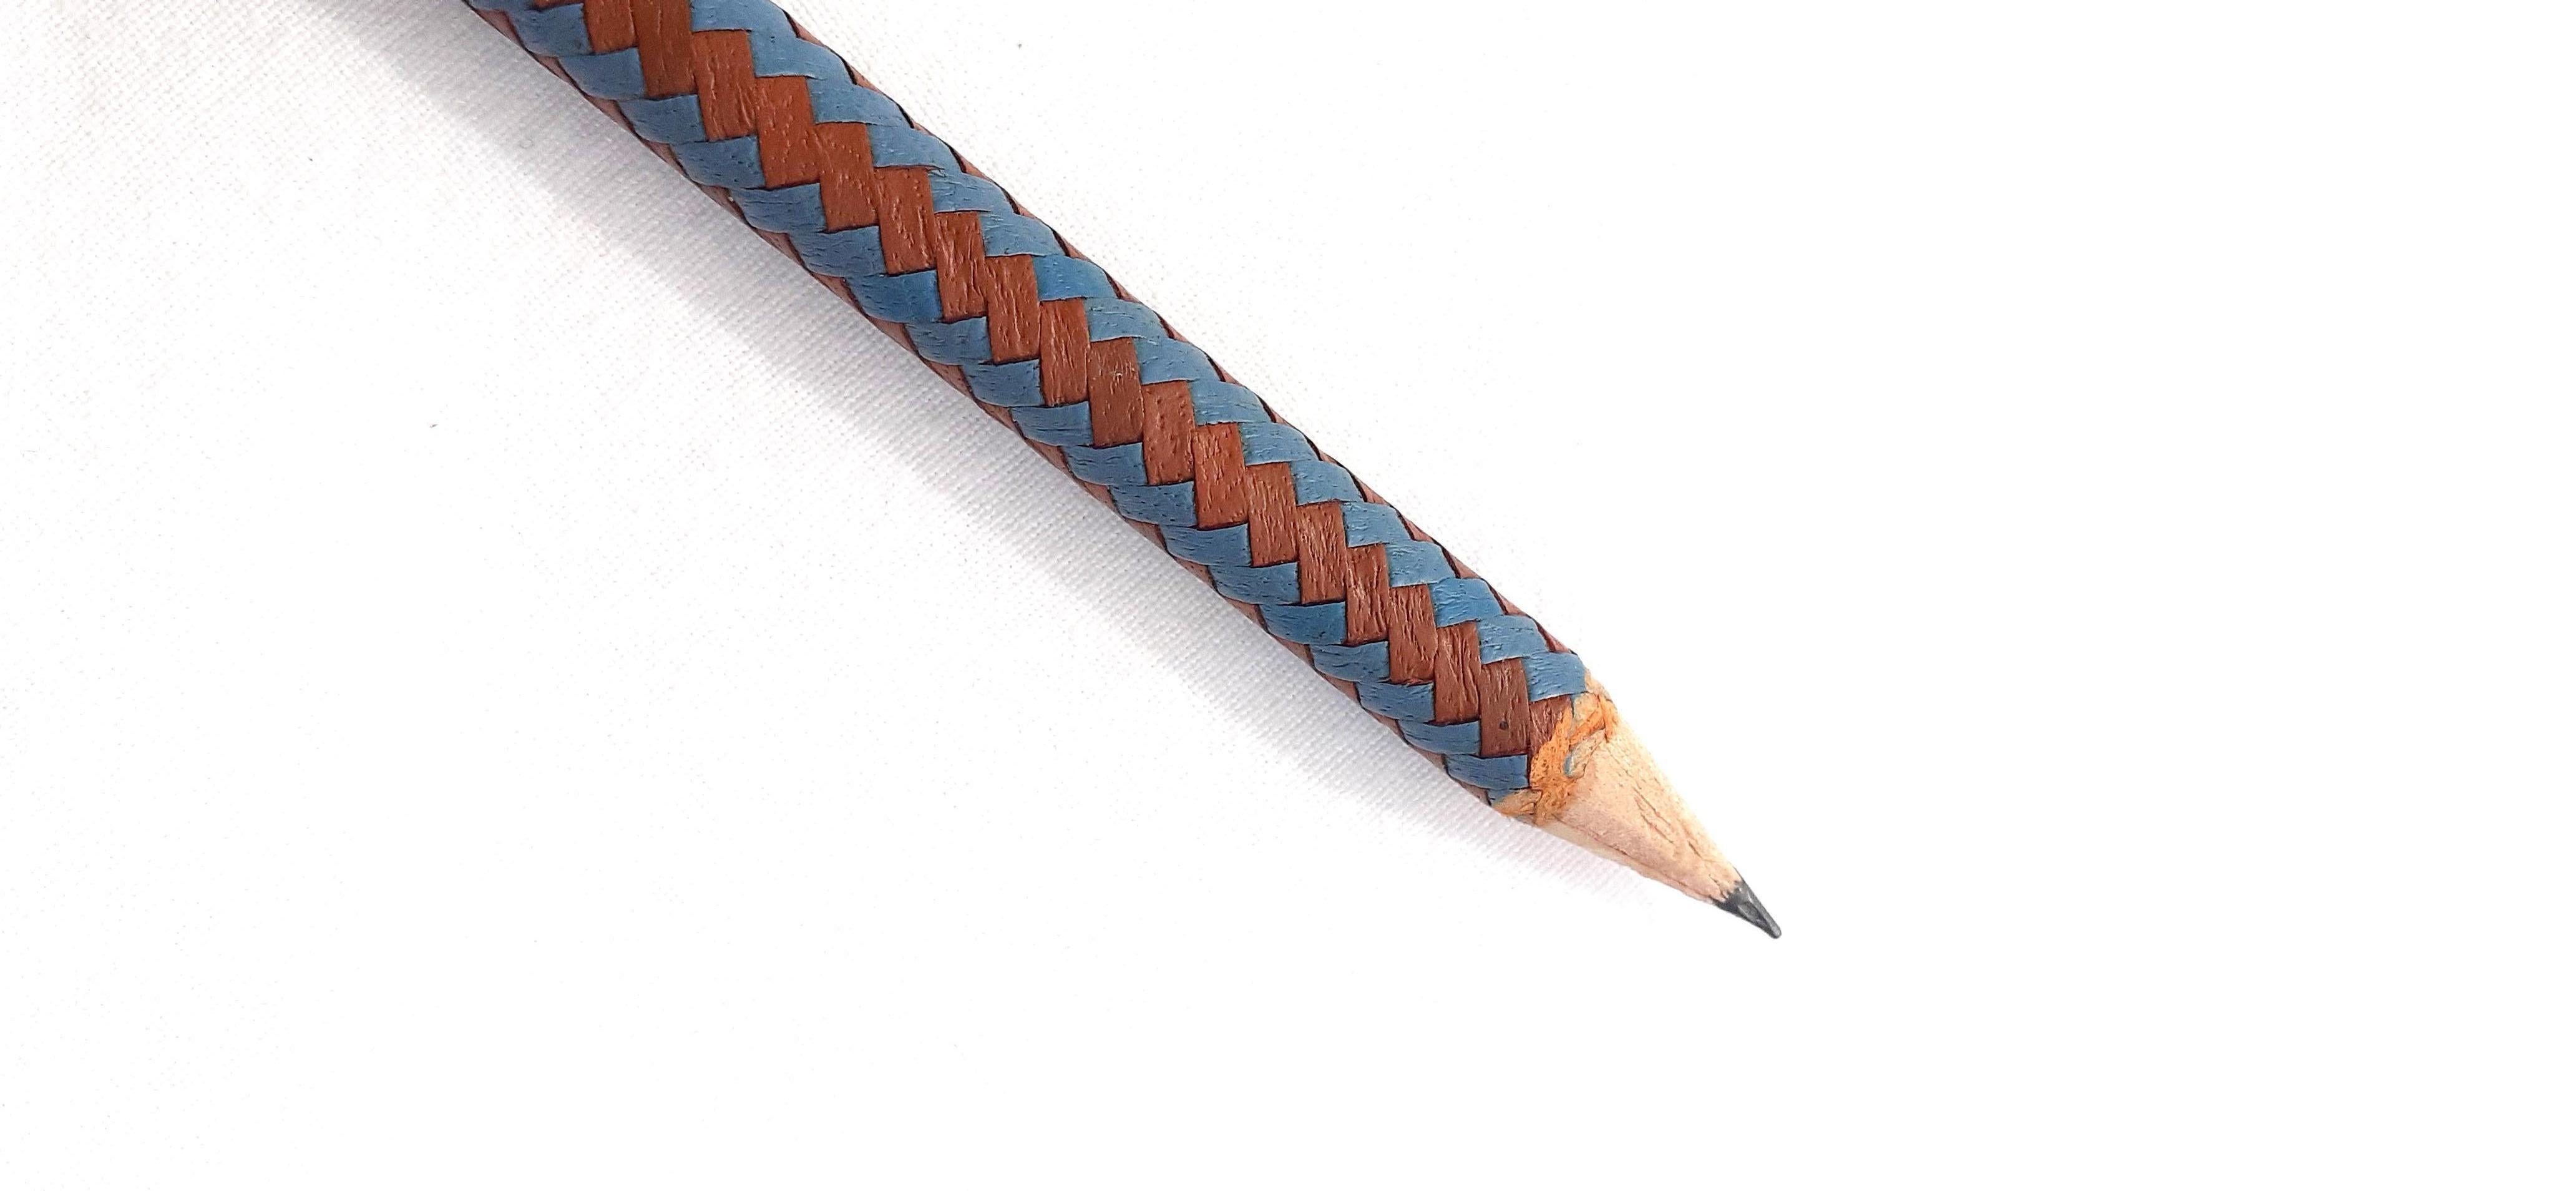 when was the lead pencil invented